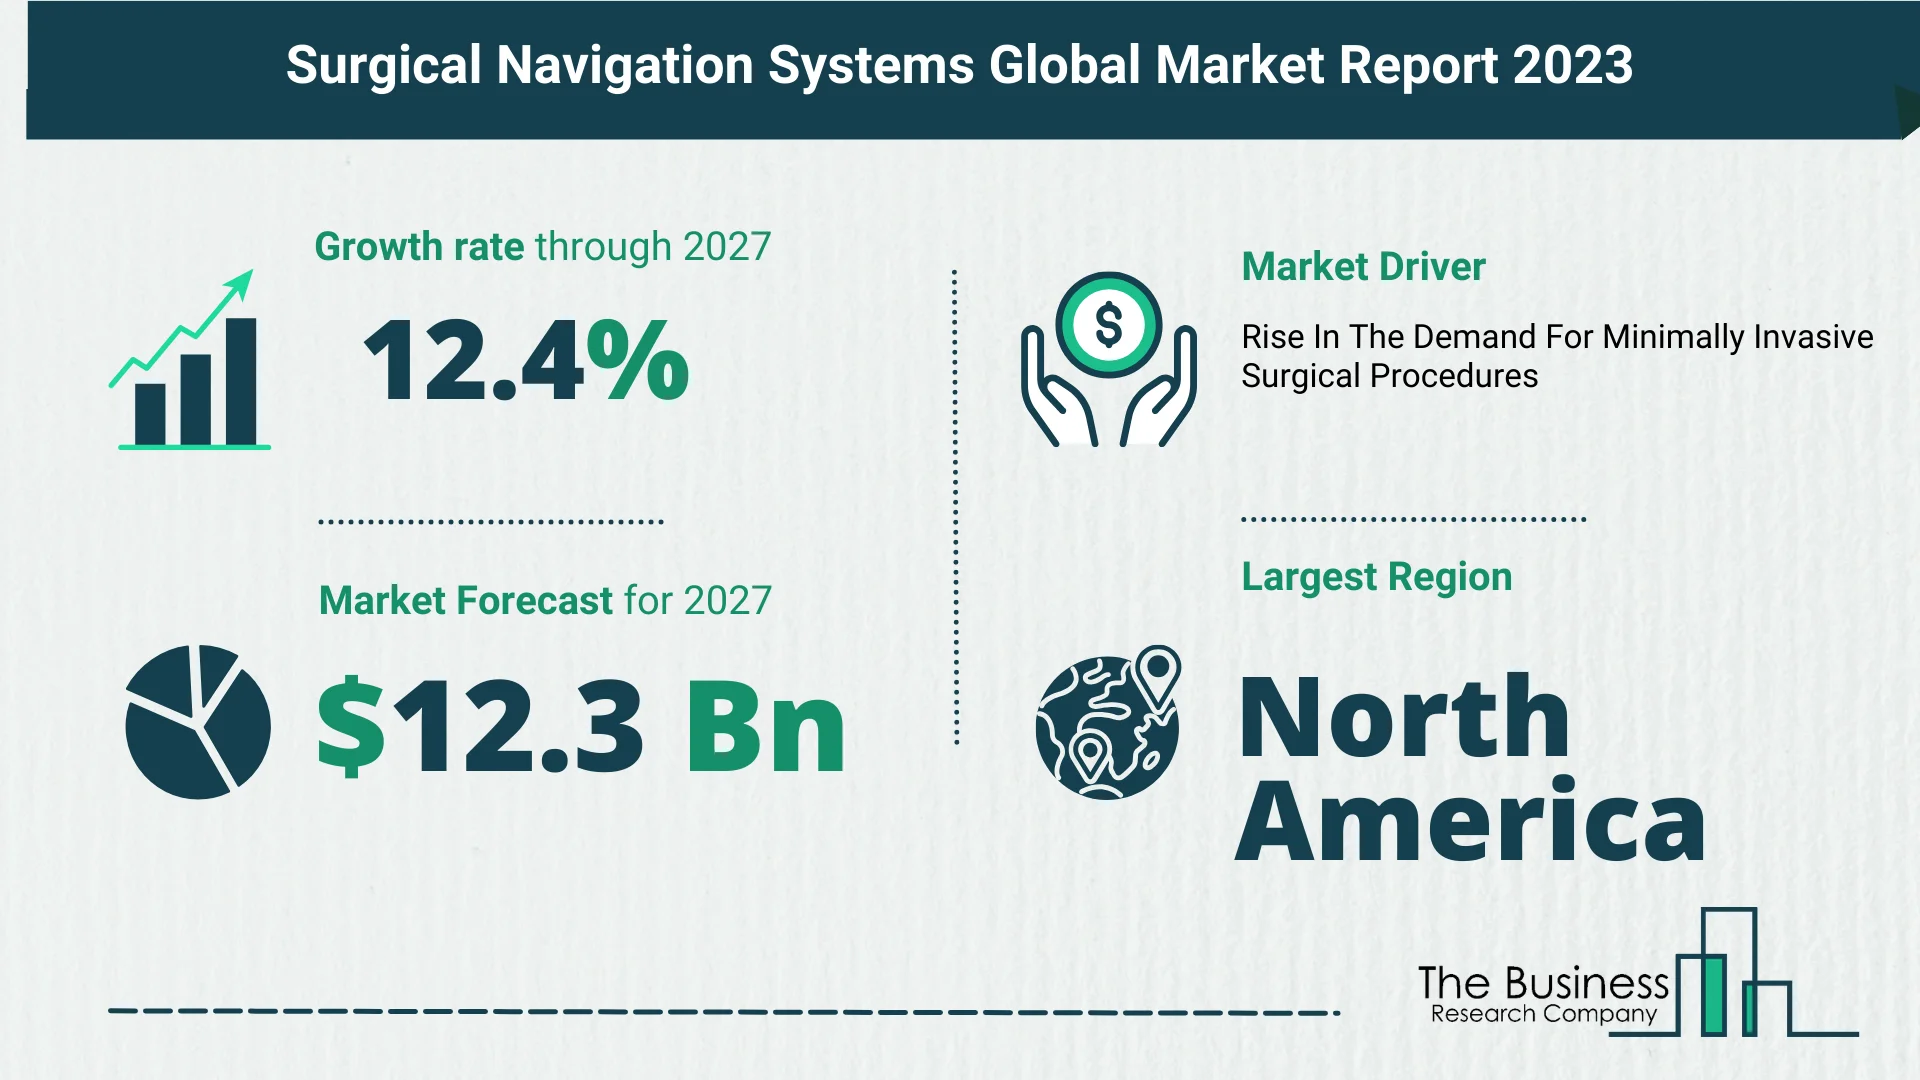 What Is TheForecast Growth Rate For The Surgical Navigation Systems Market?